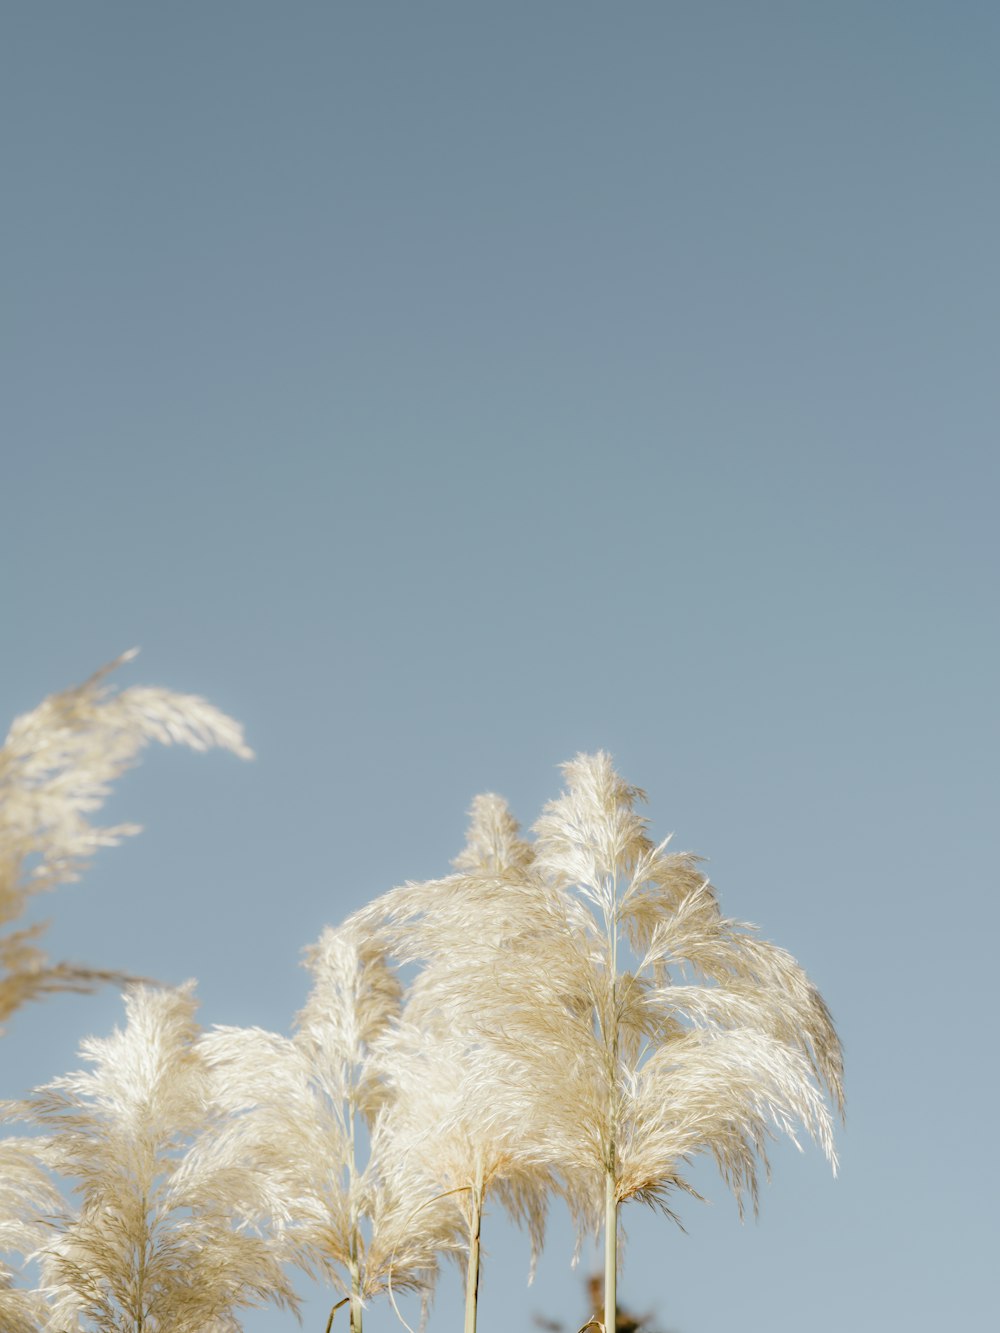 white and brown plant under blue sky during daytime